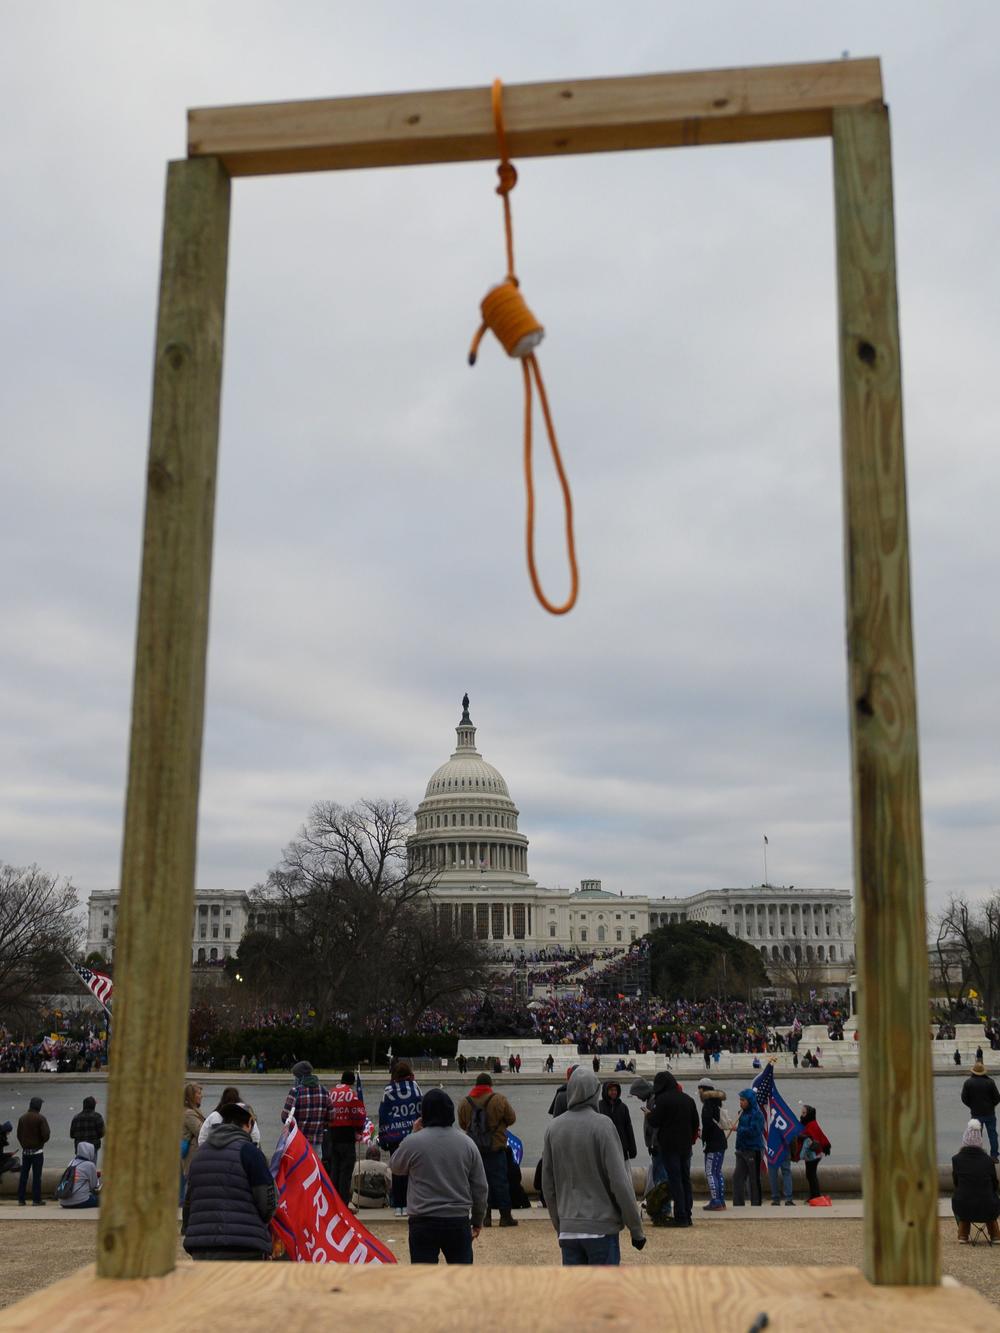 A noose on makeshift gallows was erected as supporters of President Trump gathered at the U.S. Capitol on Jan. 6.